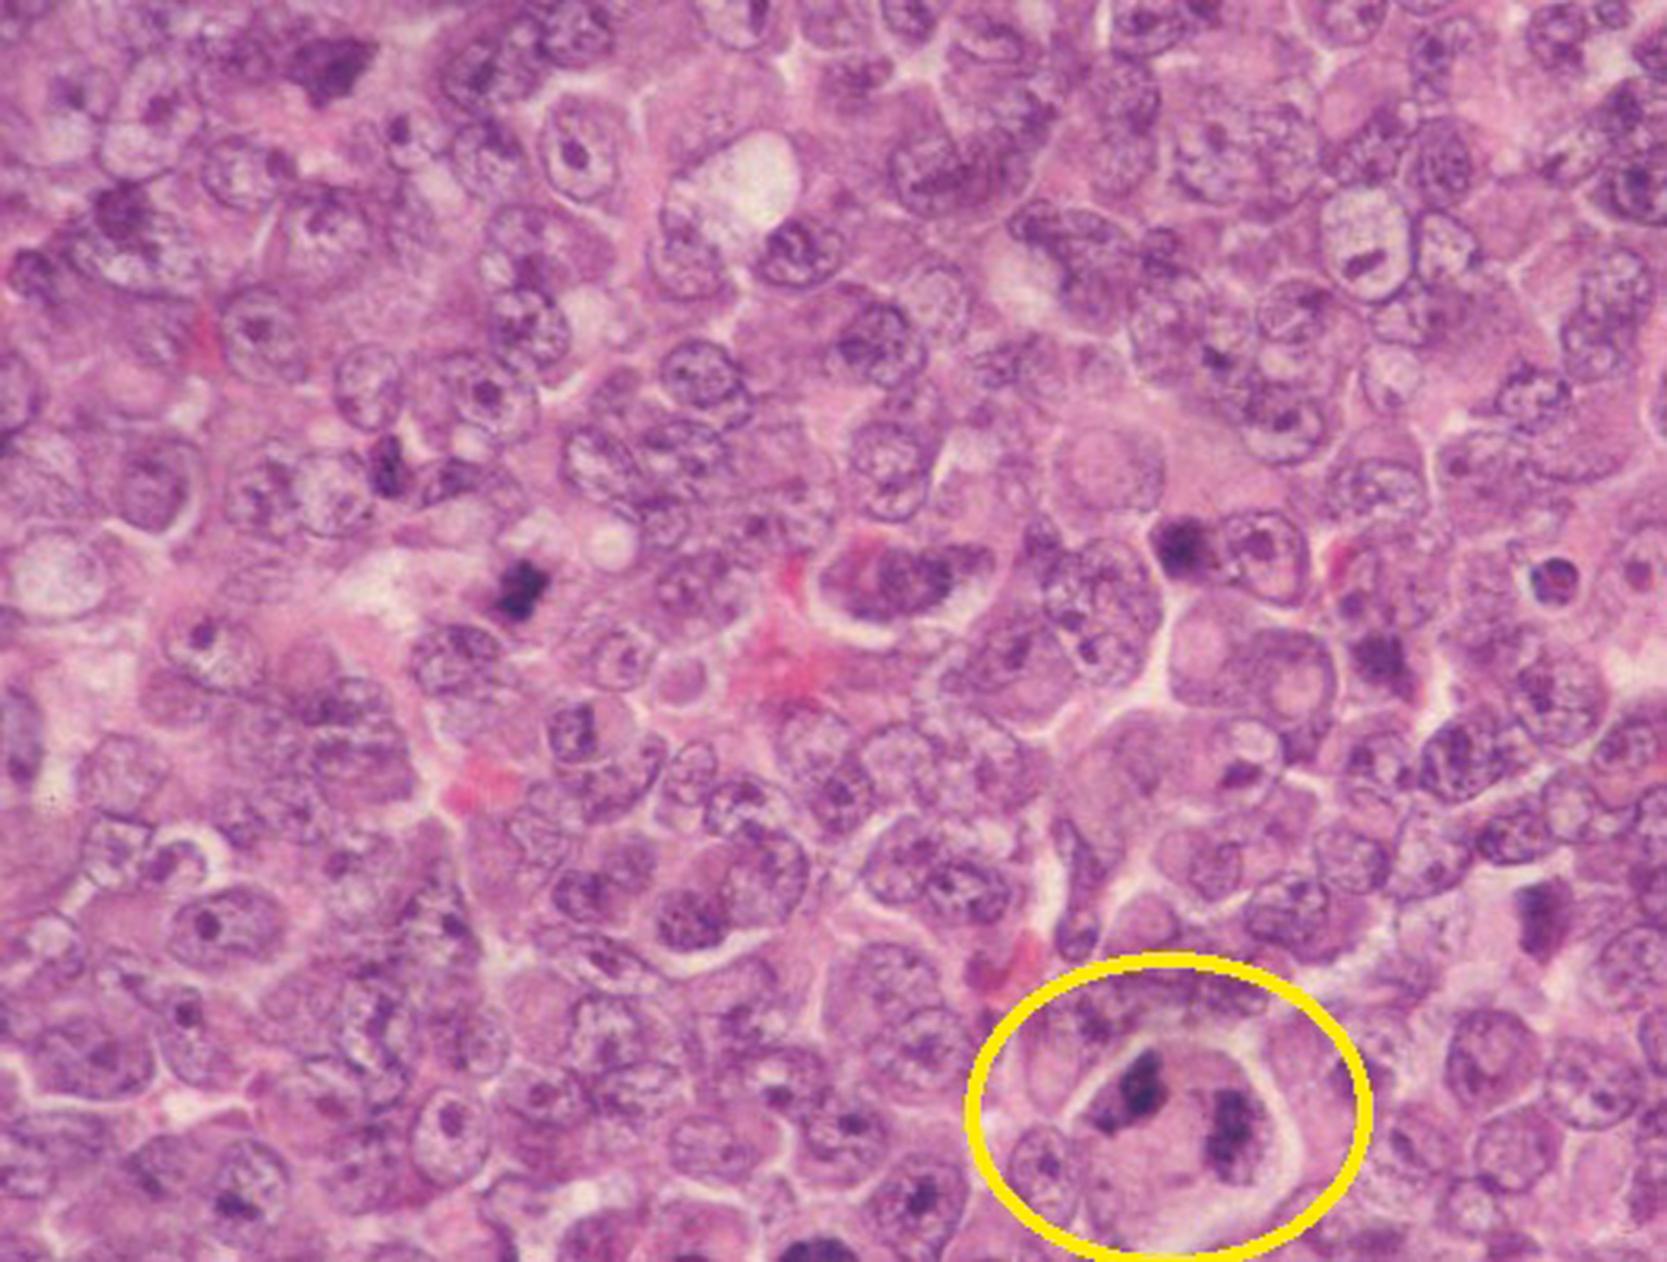 Fig. 64.7, High-power H&E slide of a rhabdoid tumor of the kidney. The yellow circle shows the classic periodic acid–Schiff–positive cytoplasmic inclusion “owl’s eyes” cells.